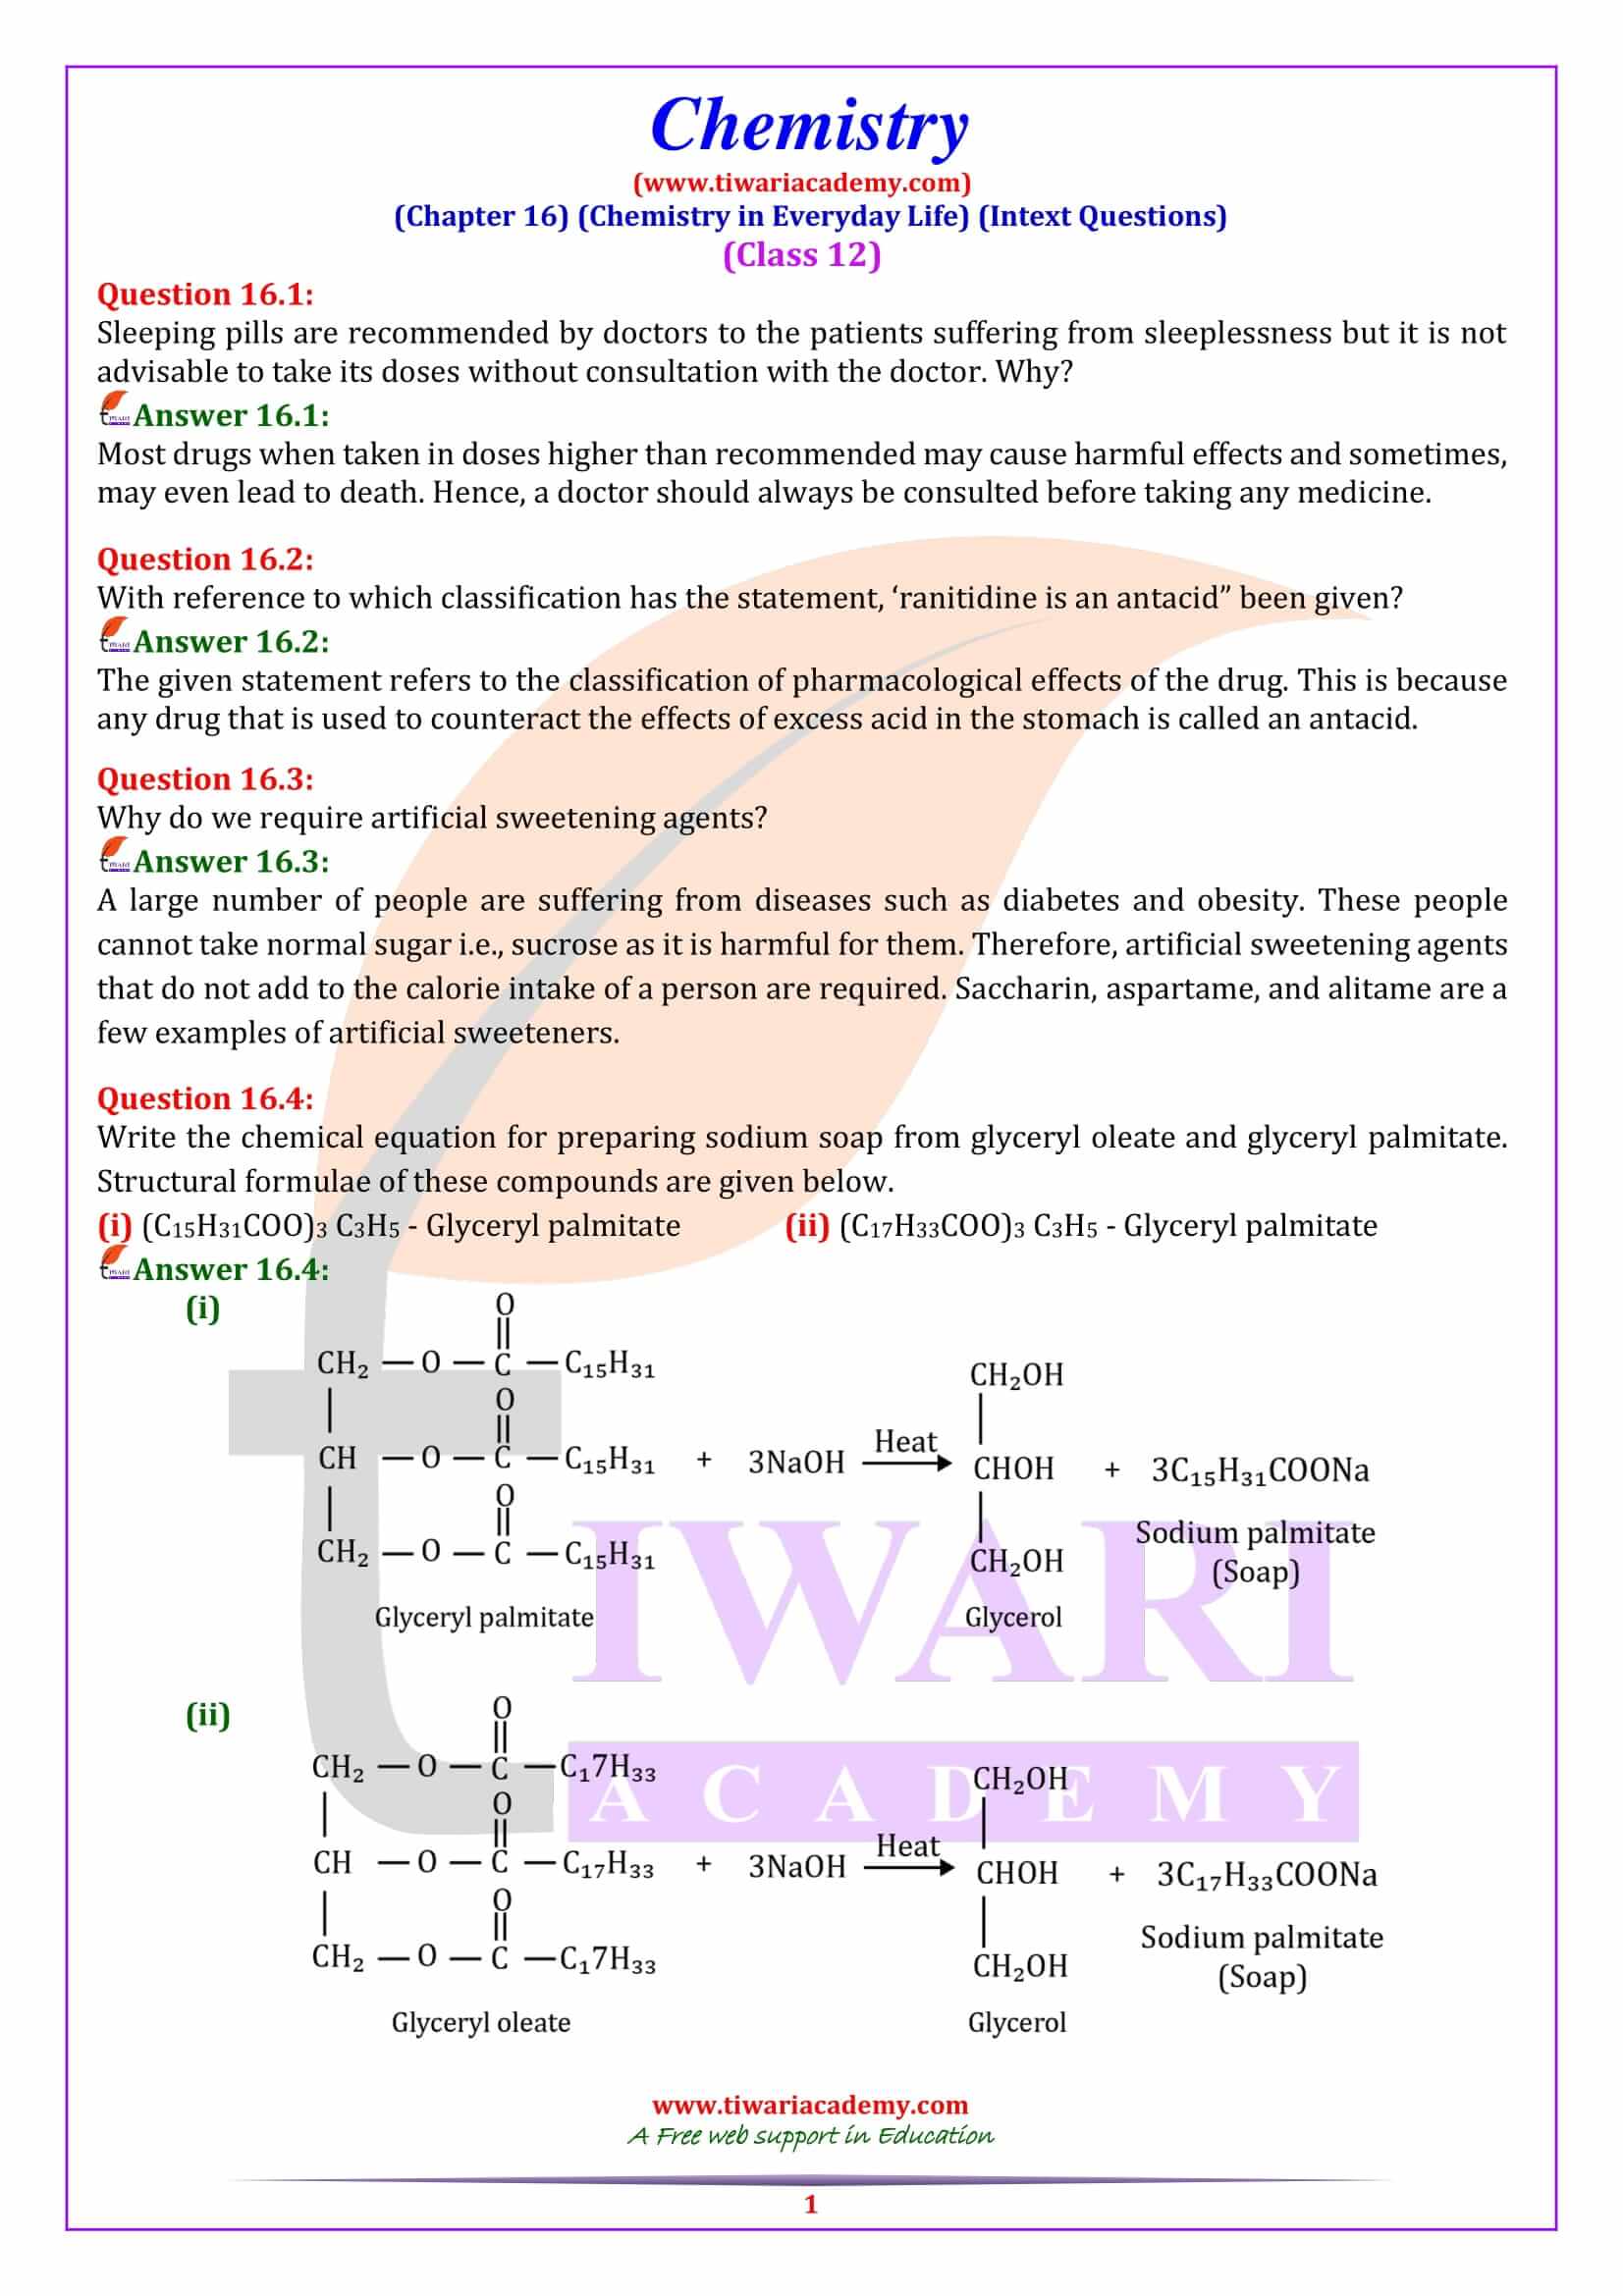 NCERT Solutions for Class 12 Chemistry Chapter 16 Intext Questions